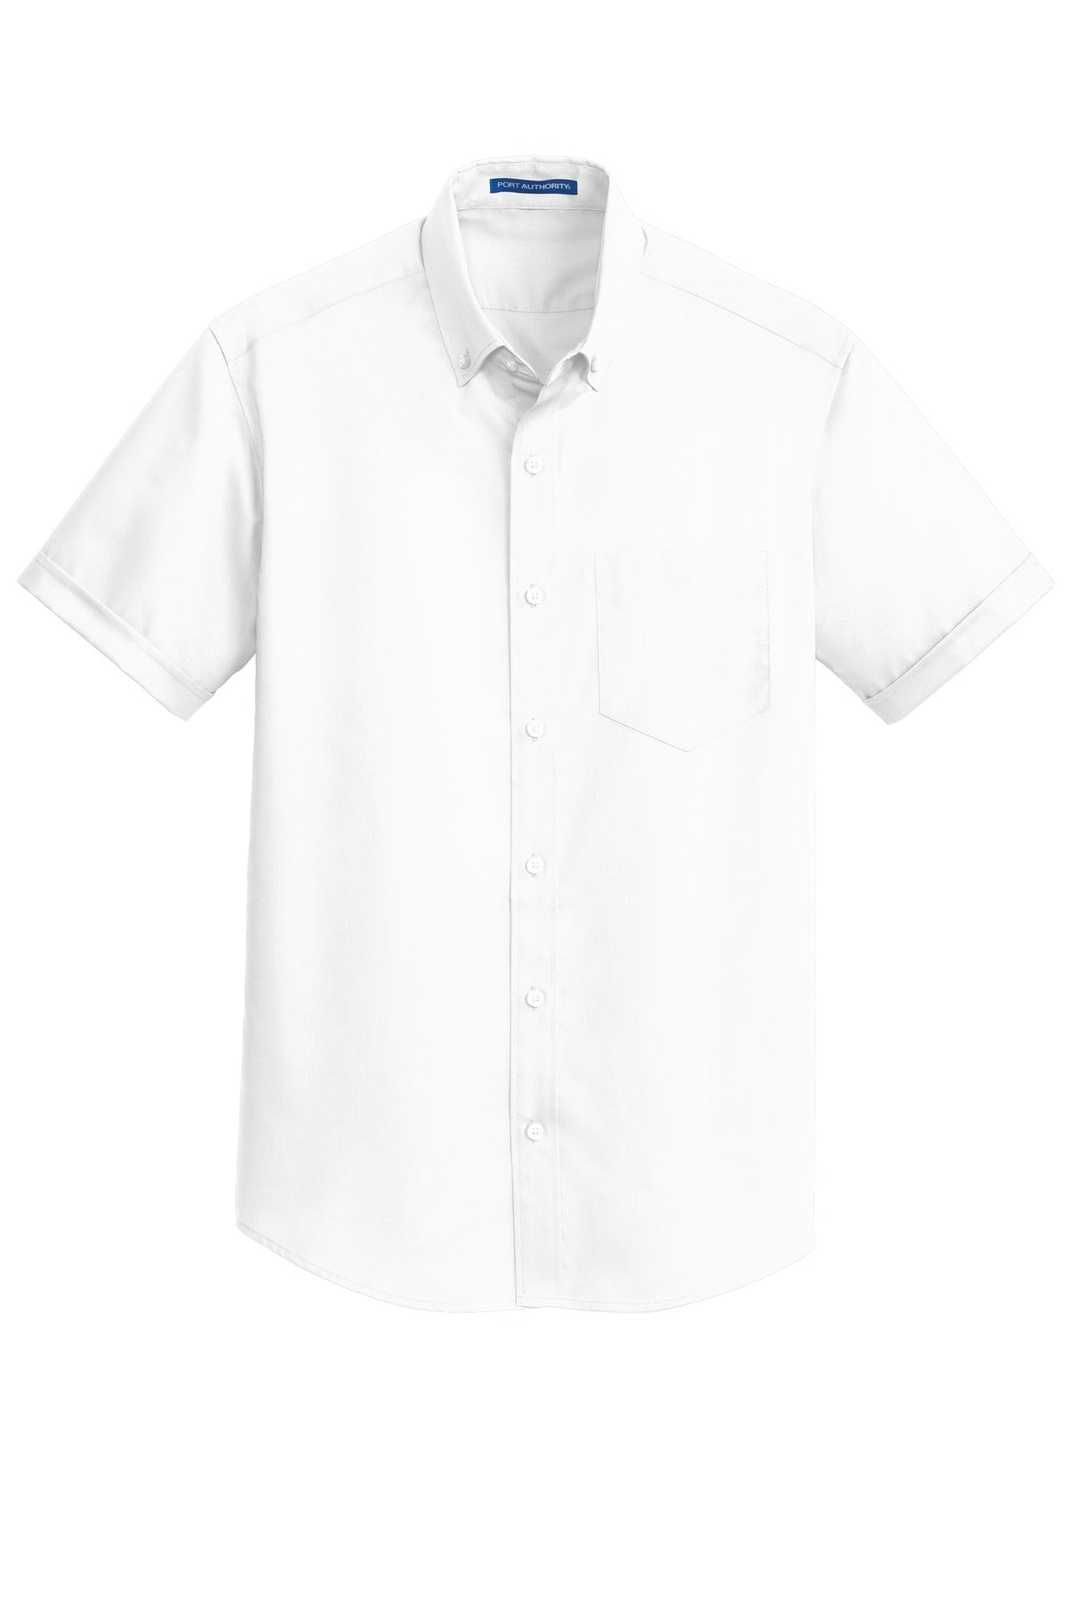 Port Authority S664 Short Sleeve Superpro Twill Shirt - White - HIT a Double - 5